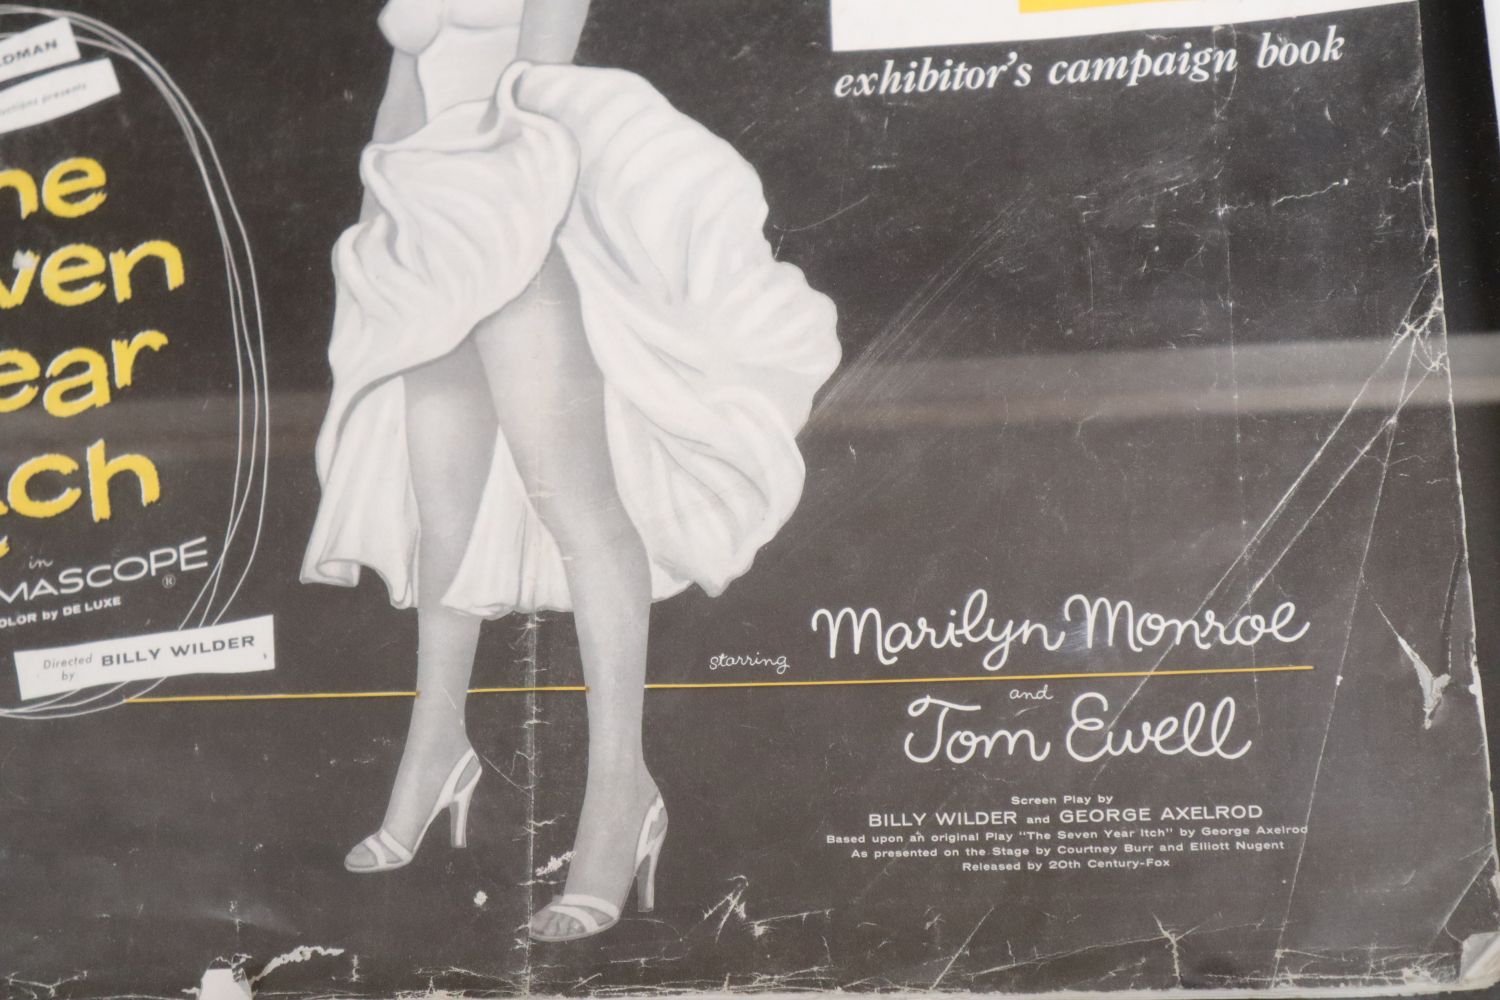 Marilyn Monroe, Seven Year Itch exhibitors campaign book